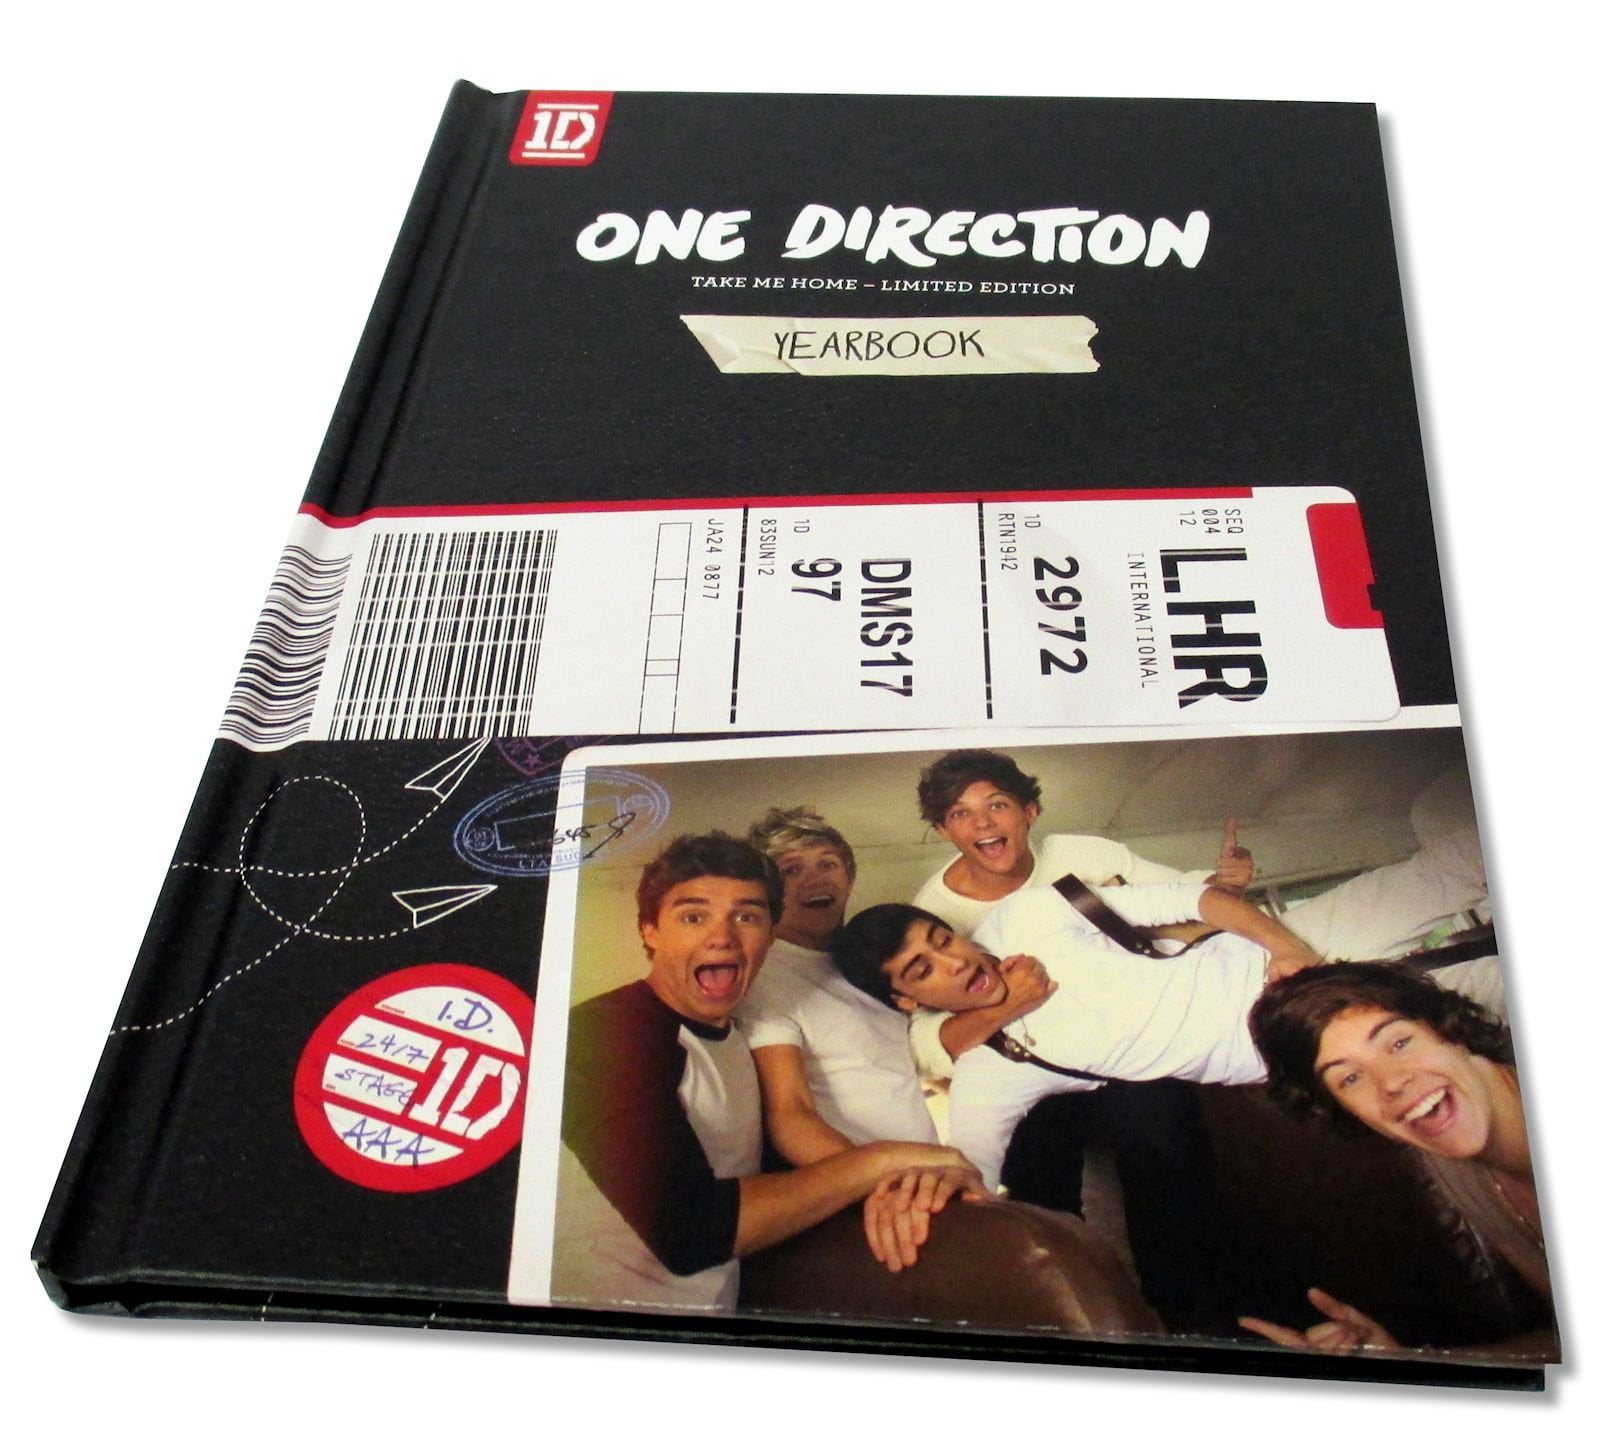 One Direction Take Me Home Limited Edition Yearbook + CD (Canadian Version)  - Walmart.com